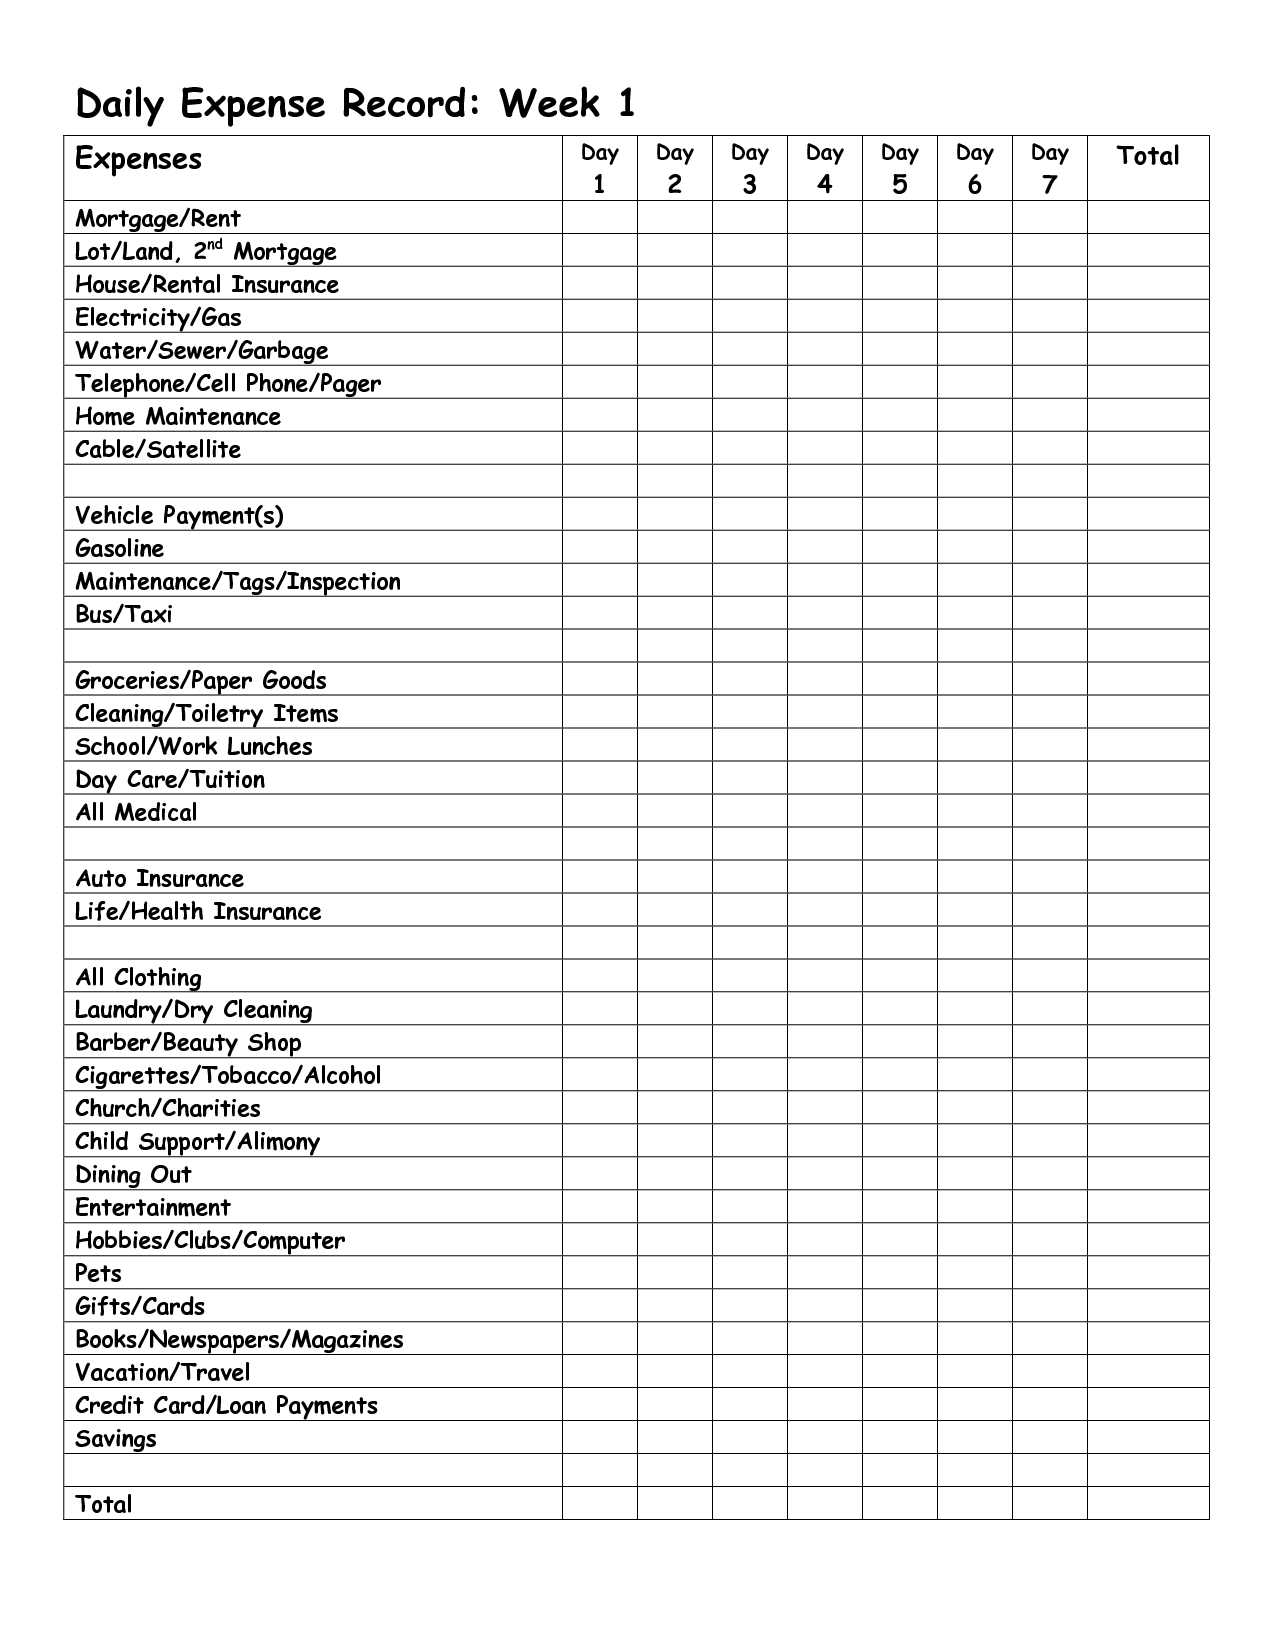 Monthly Expense Report Template | Daily Expense Record Week Inside Daily Expense Report Template